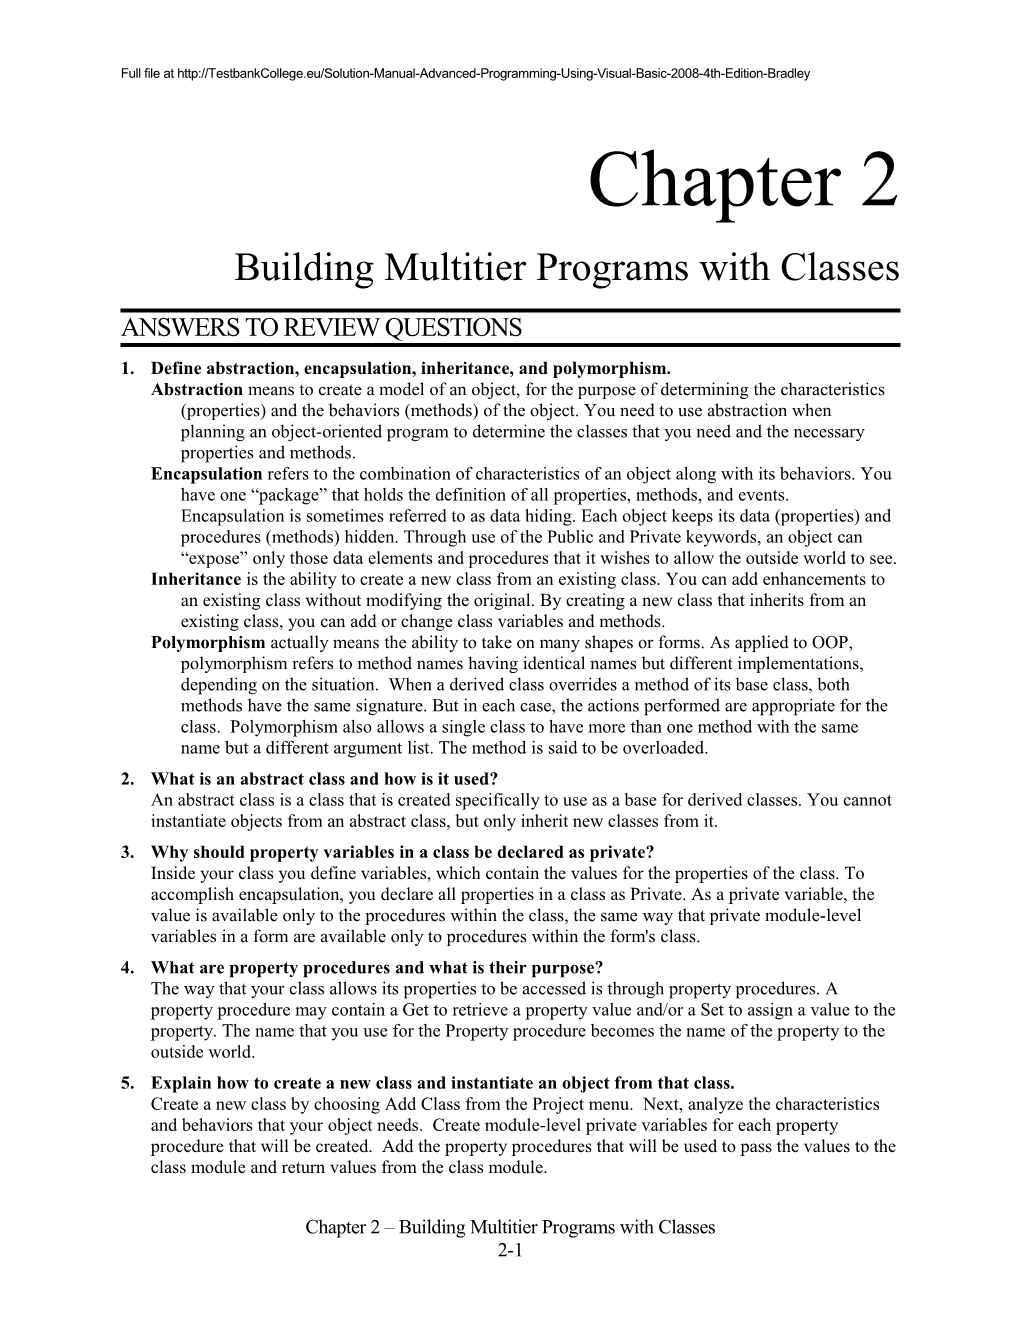 CHAPTER 2 - Building Multitier Programs with Classes